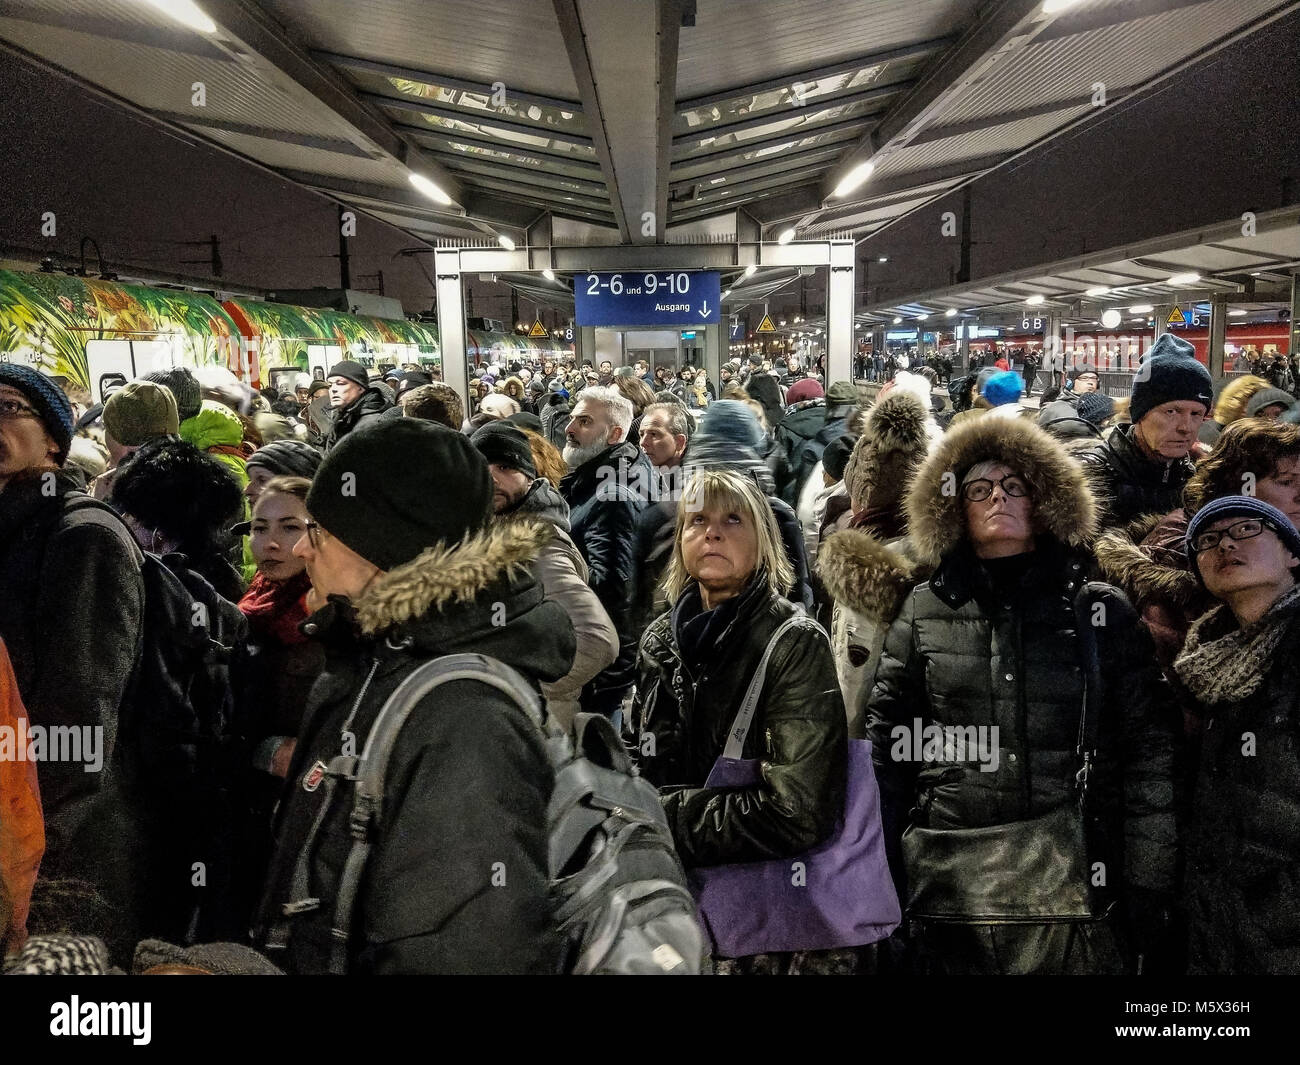 Munich, Bavaria, Germany. 26th Feb, 2018. The platform at the Pasing station, where thousands of riders hoped to find connections to get home. Due to a failed overhead powerline at Munich's Pasing train station, yet another failure of the overburdened S-Bahn train system in the city caused chaos that is persisting some 12 hours after the initial failure. Continuing on are complete shutdowns of the system as of 19:00 local time, with slow, limited, intermittent service in between. On the platforms one may seen thousands of people tryng to get home with no replacement services available. Stock Photo